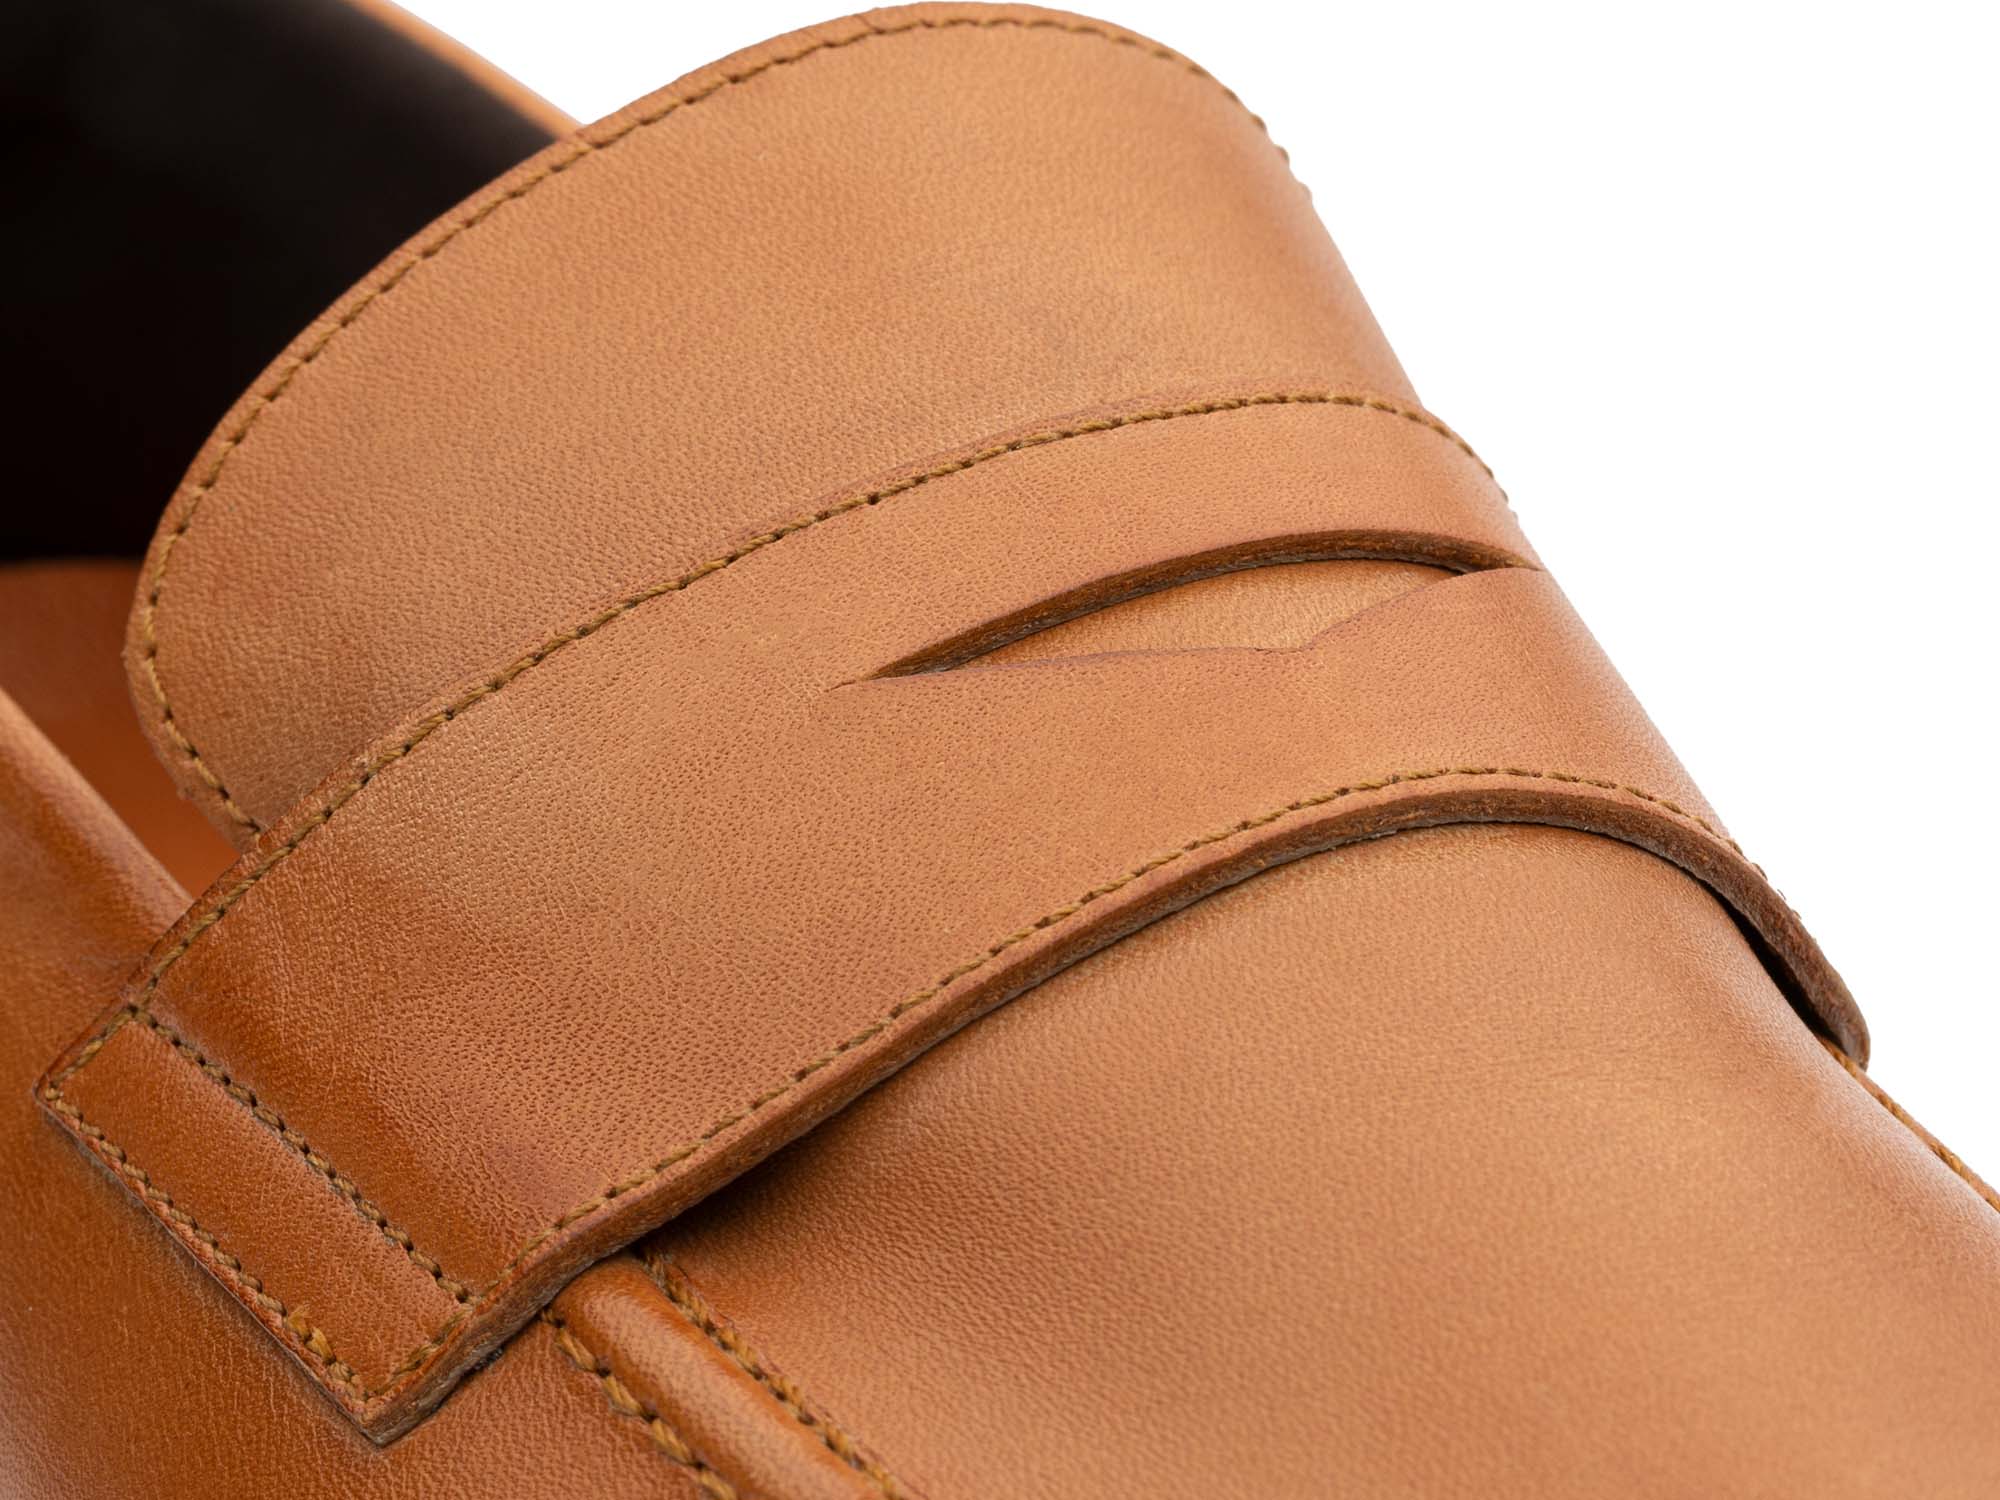 brown leather dress shoes